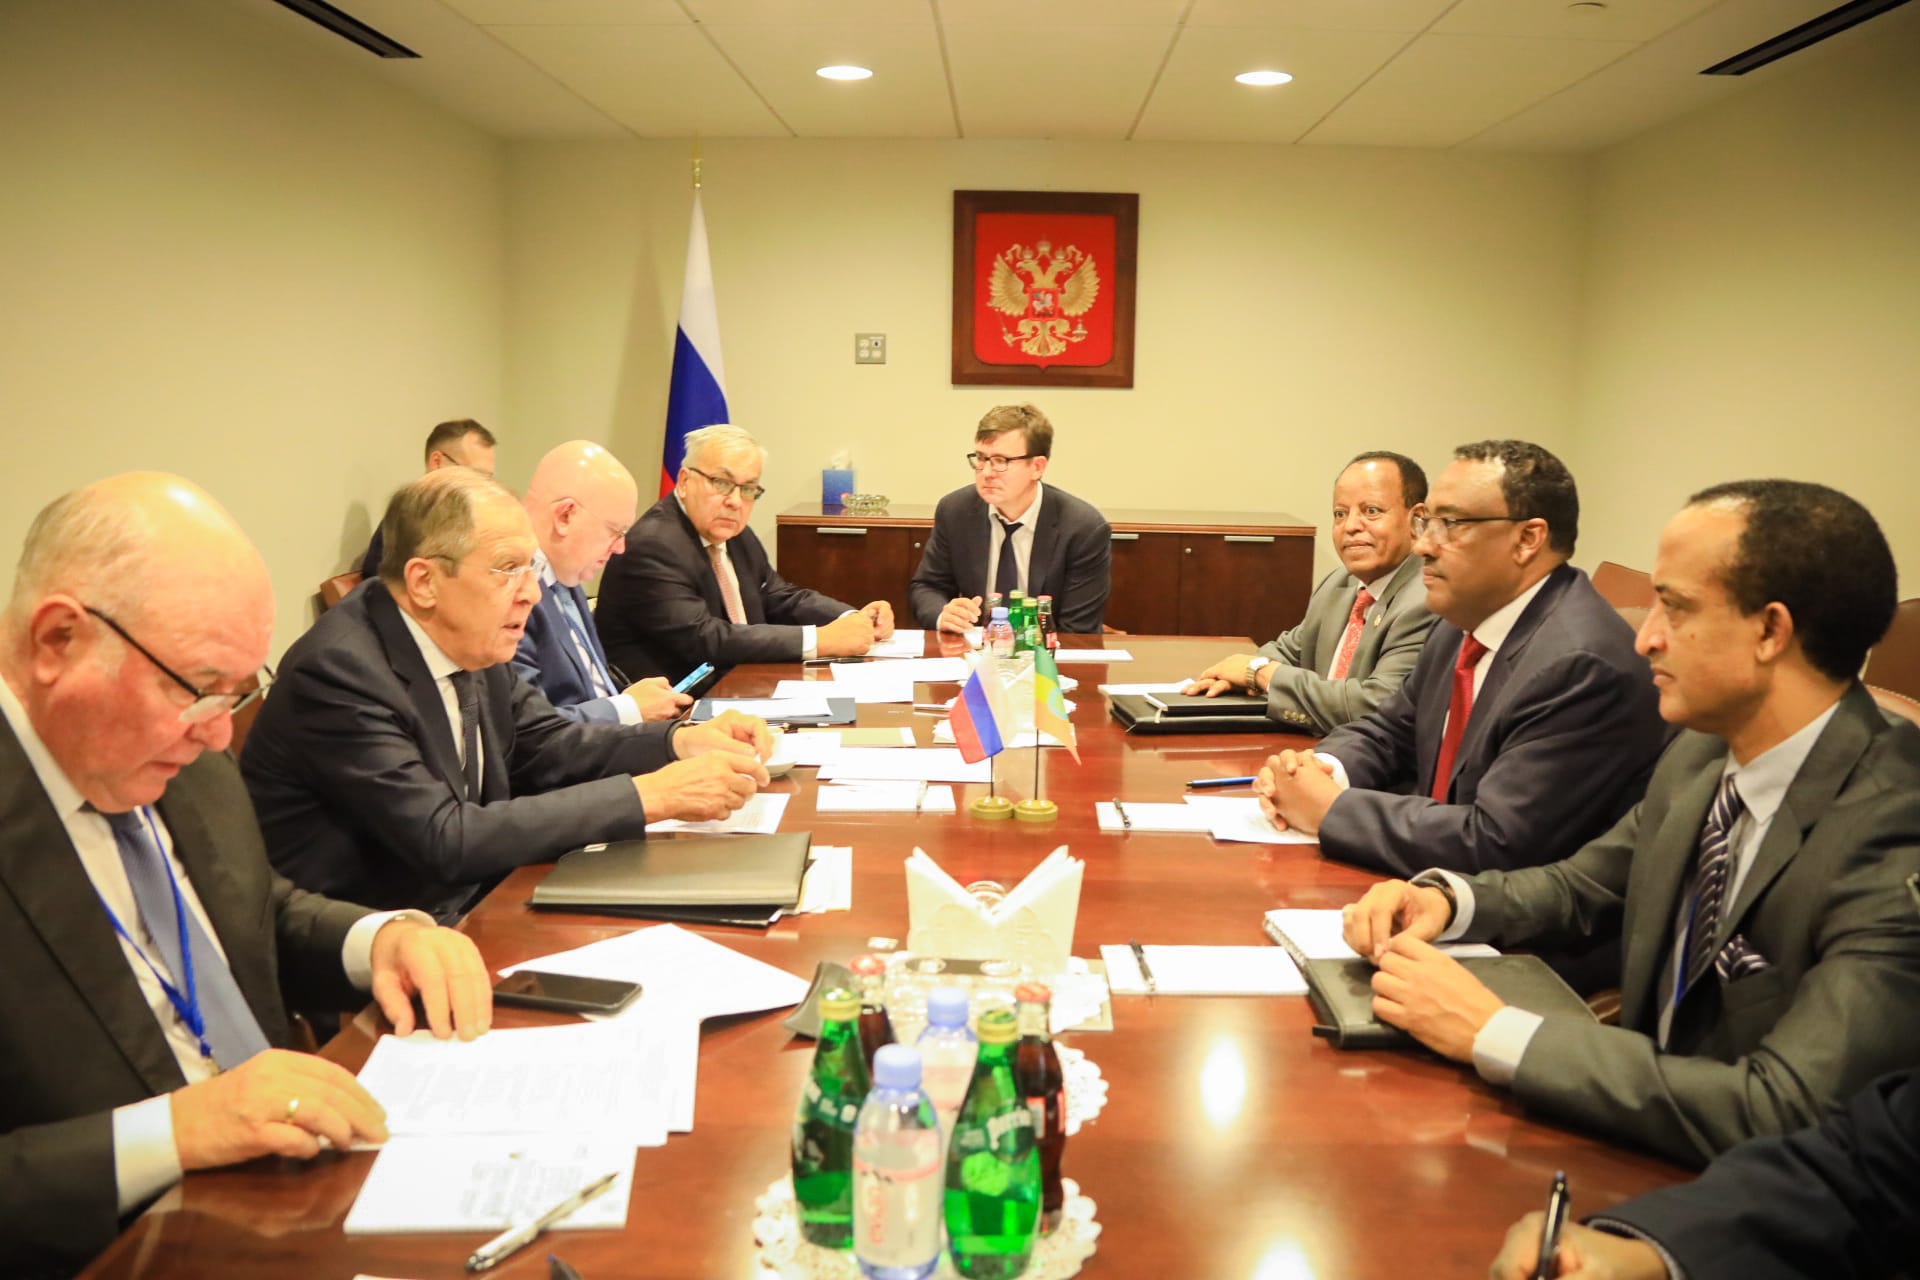 Deputy Prime Minister and Foreign Minister H.E. Mr. Demeke Mekonnen held a separate #UNGA77 sideline meeting with Russian FM Sergey Lavrov and Malian FM Abdoulaye Diop.